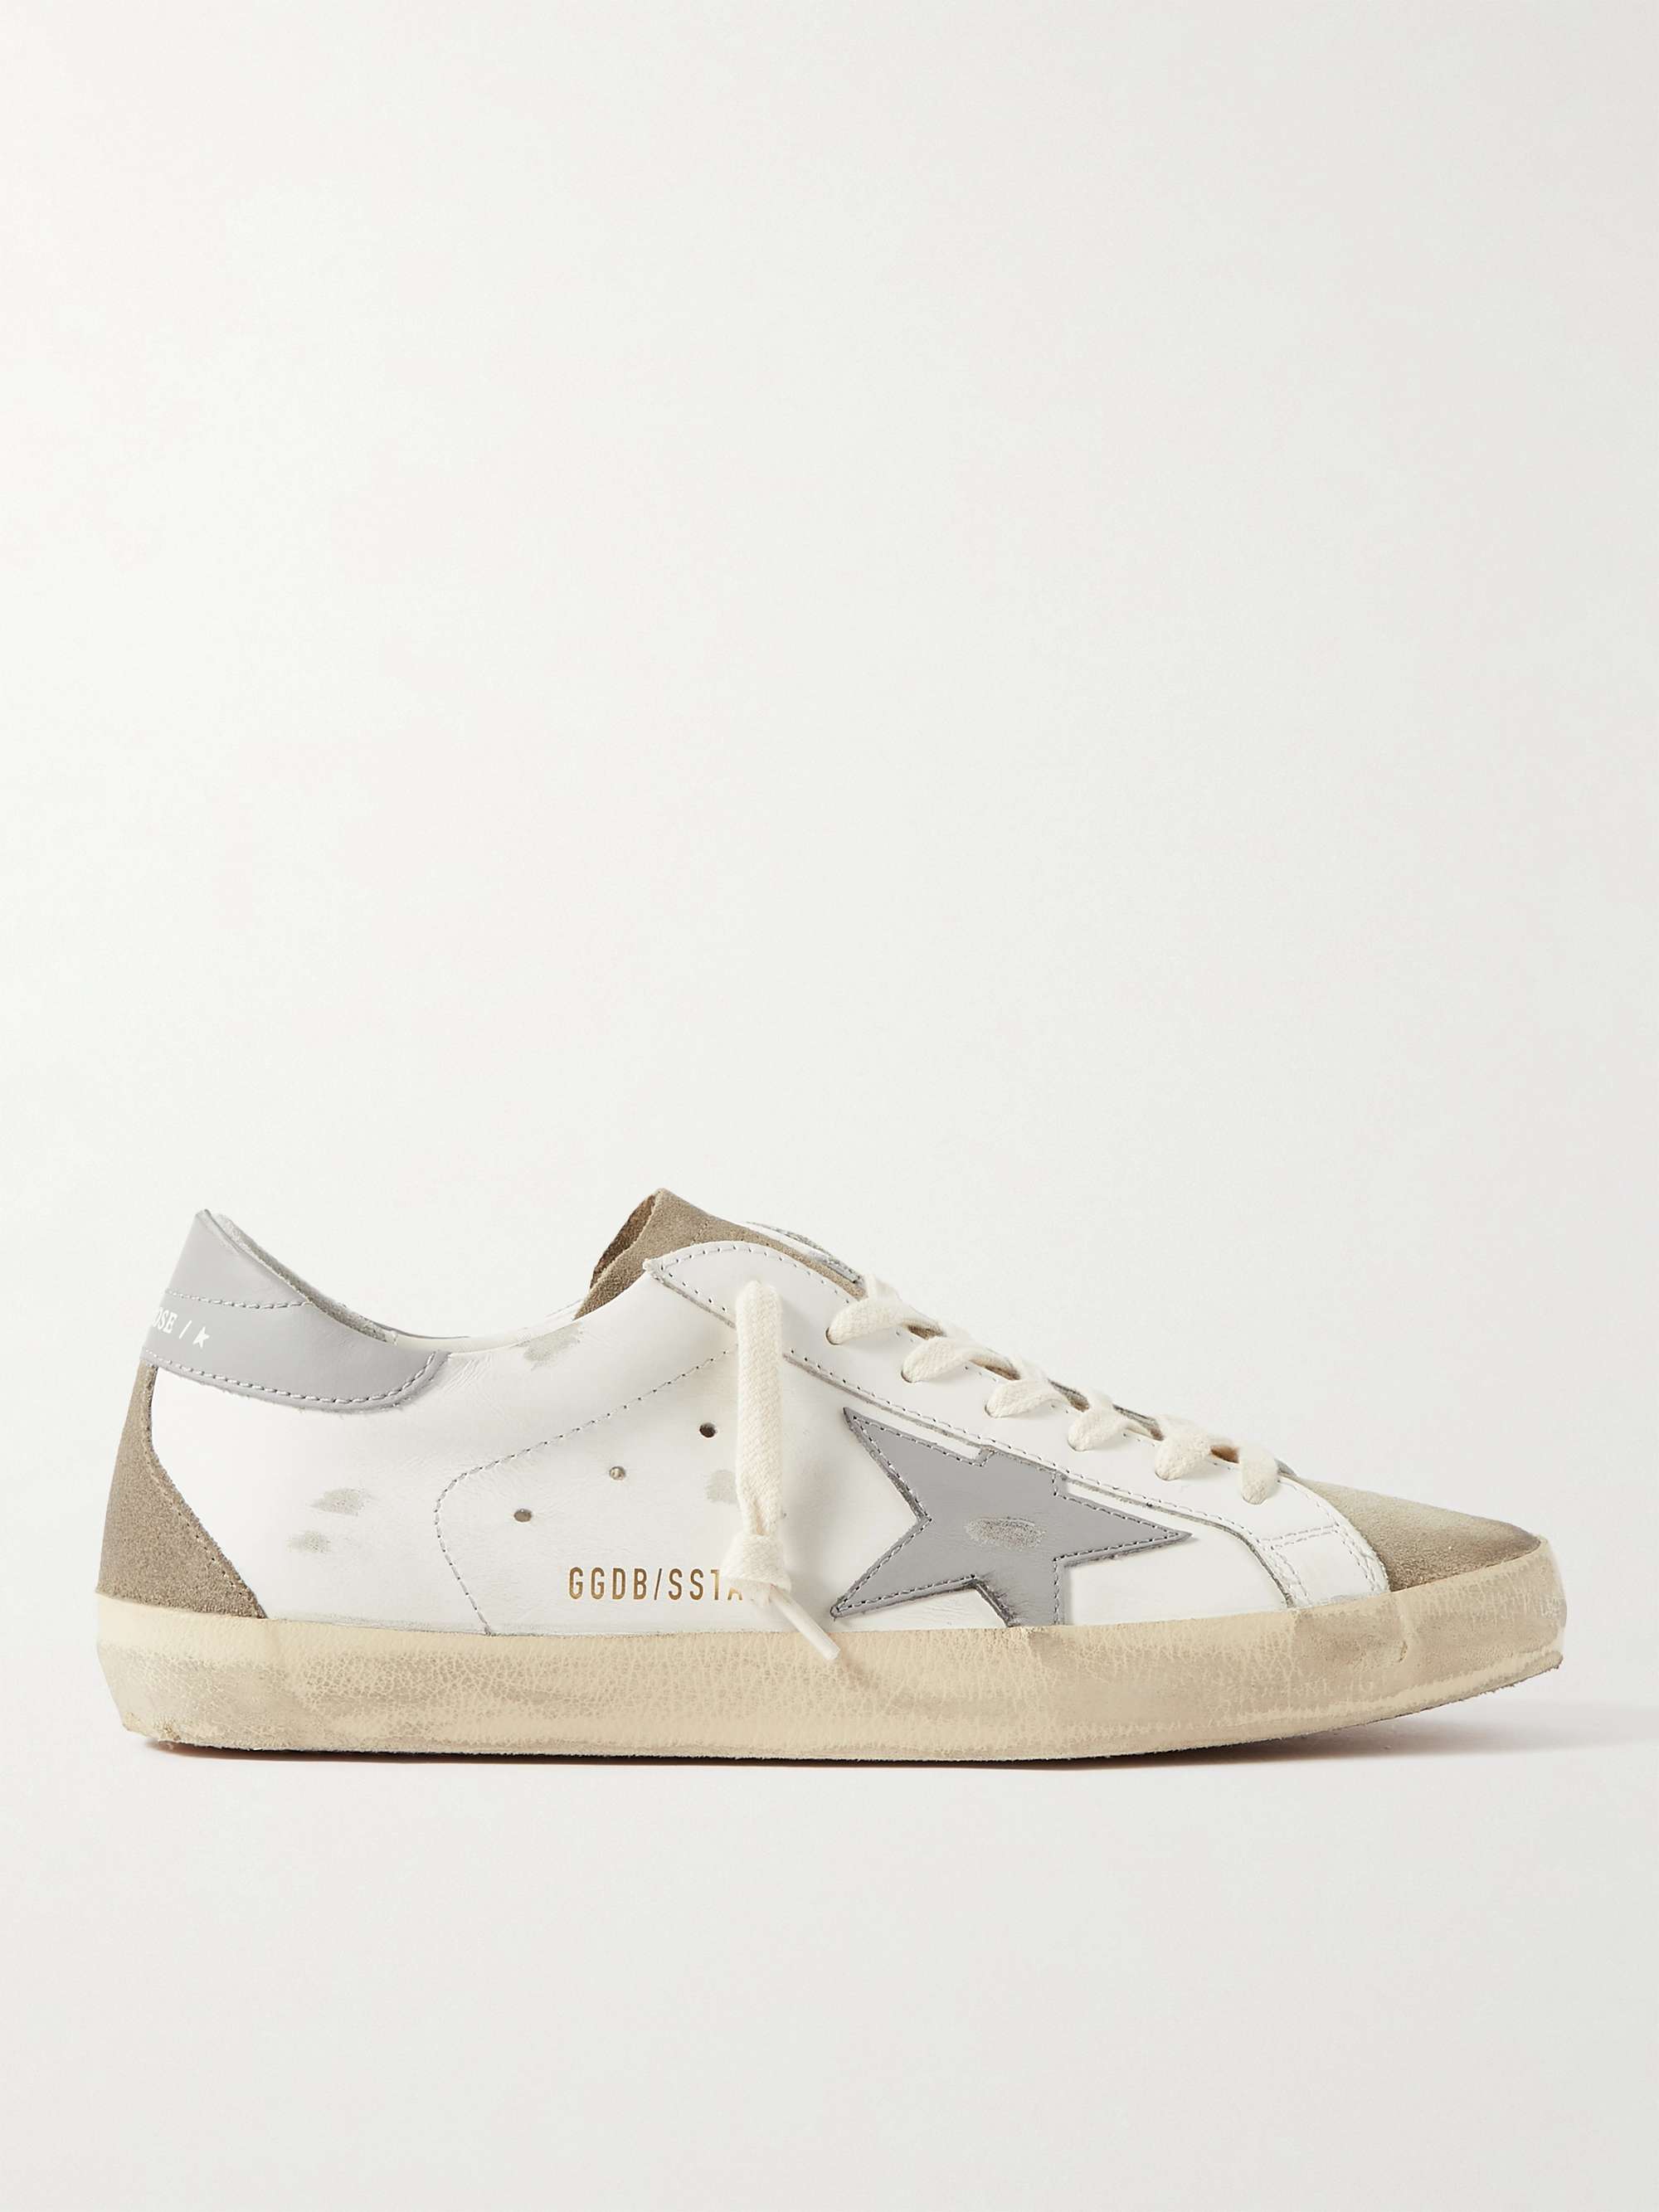 GOLDEN GOOSE Superstar Distressed Leather and Suede Sneakers for | MR PORTER